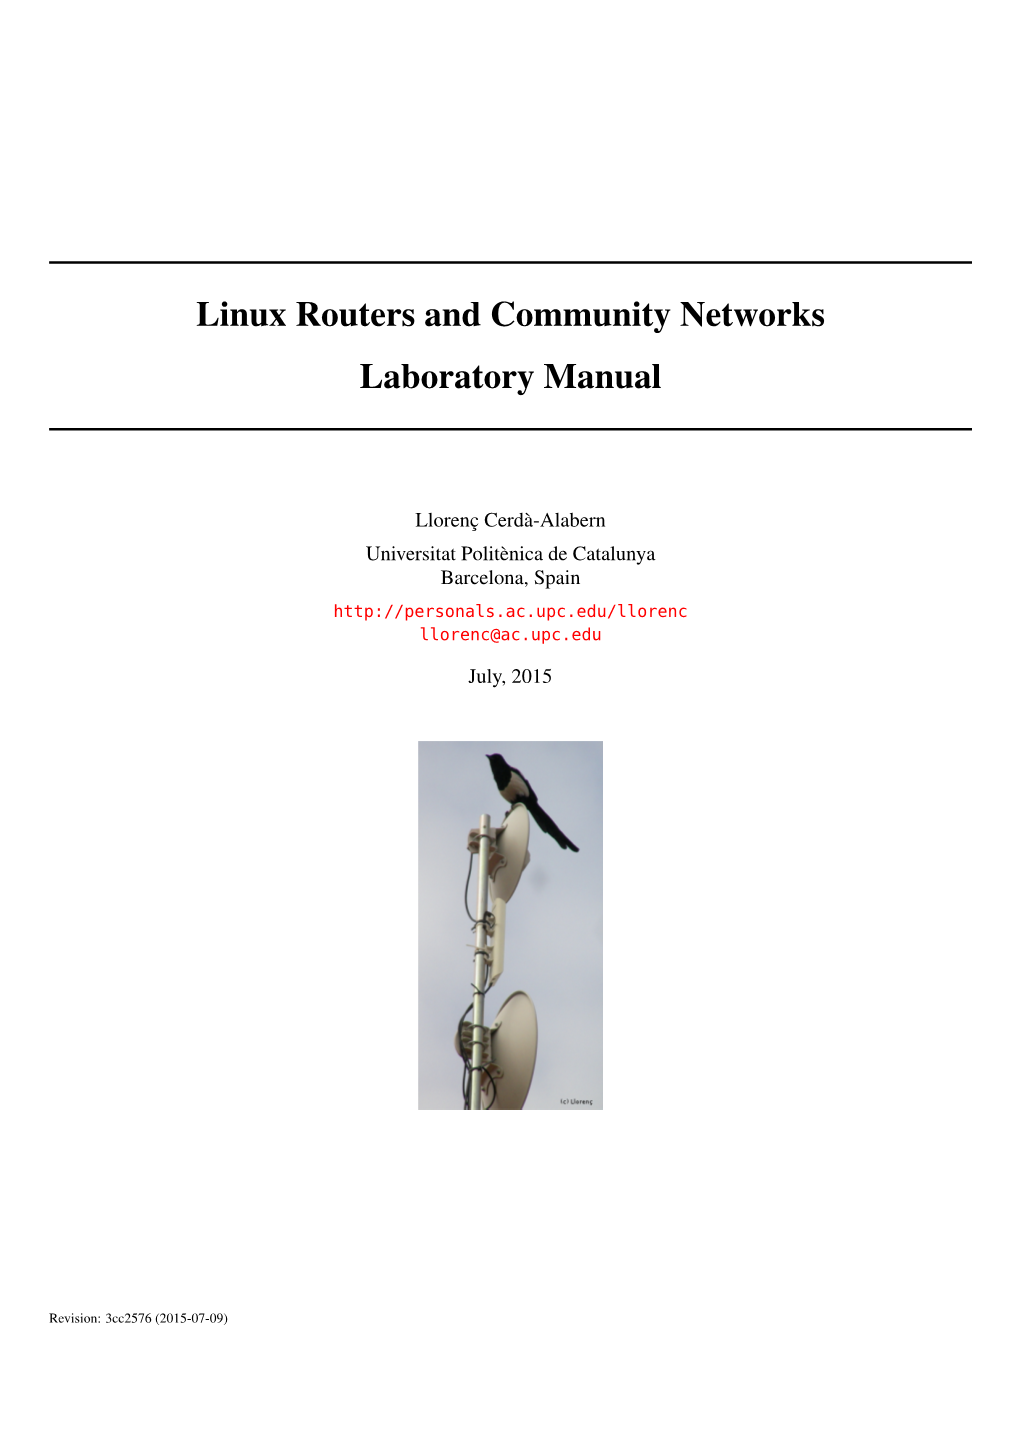 Linux Routers and Community Networks Laboratory Manual